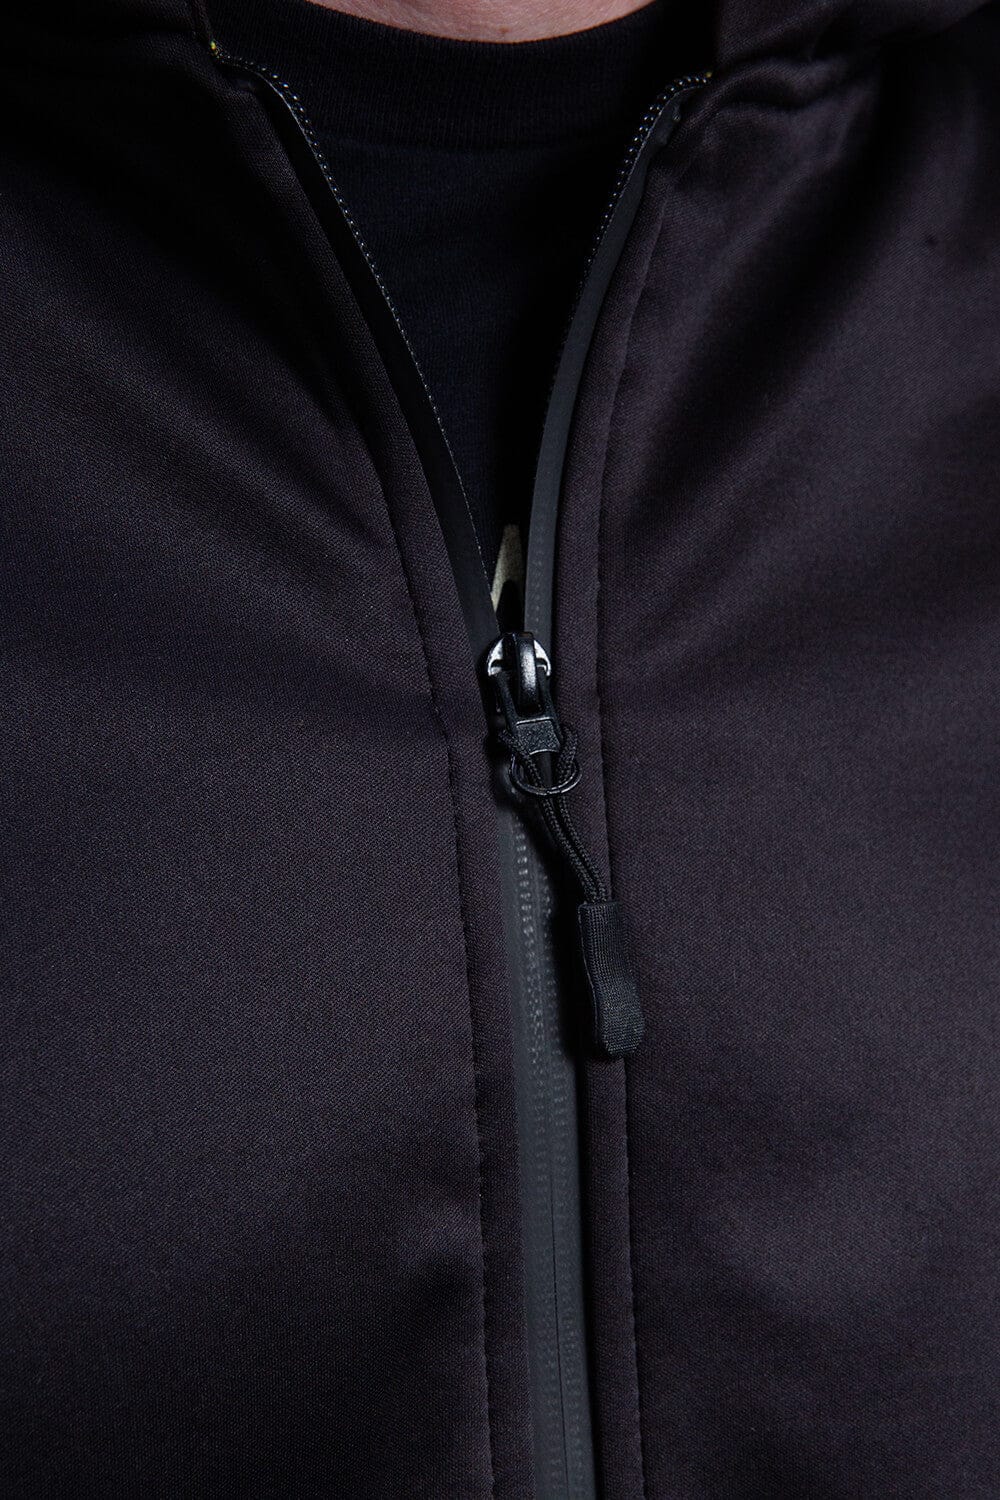 Wayward Armored Hoodie. Fully Lined with DuPont™ Kevlar®, Pockets for ...